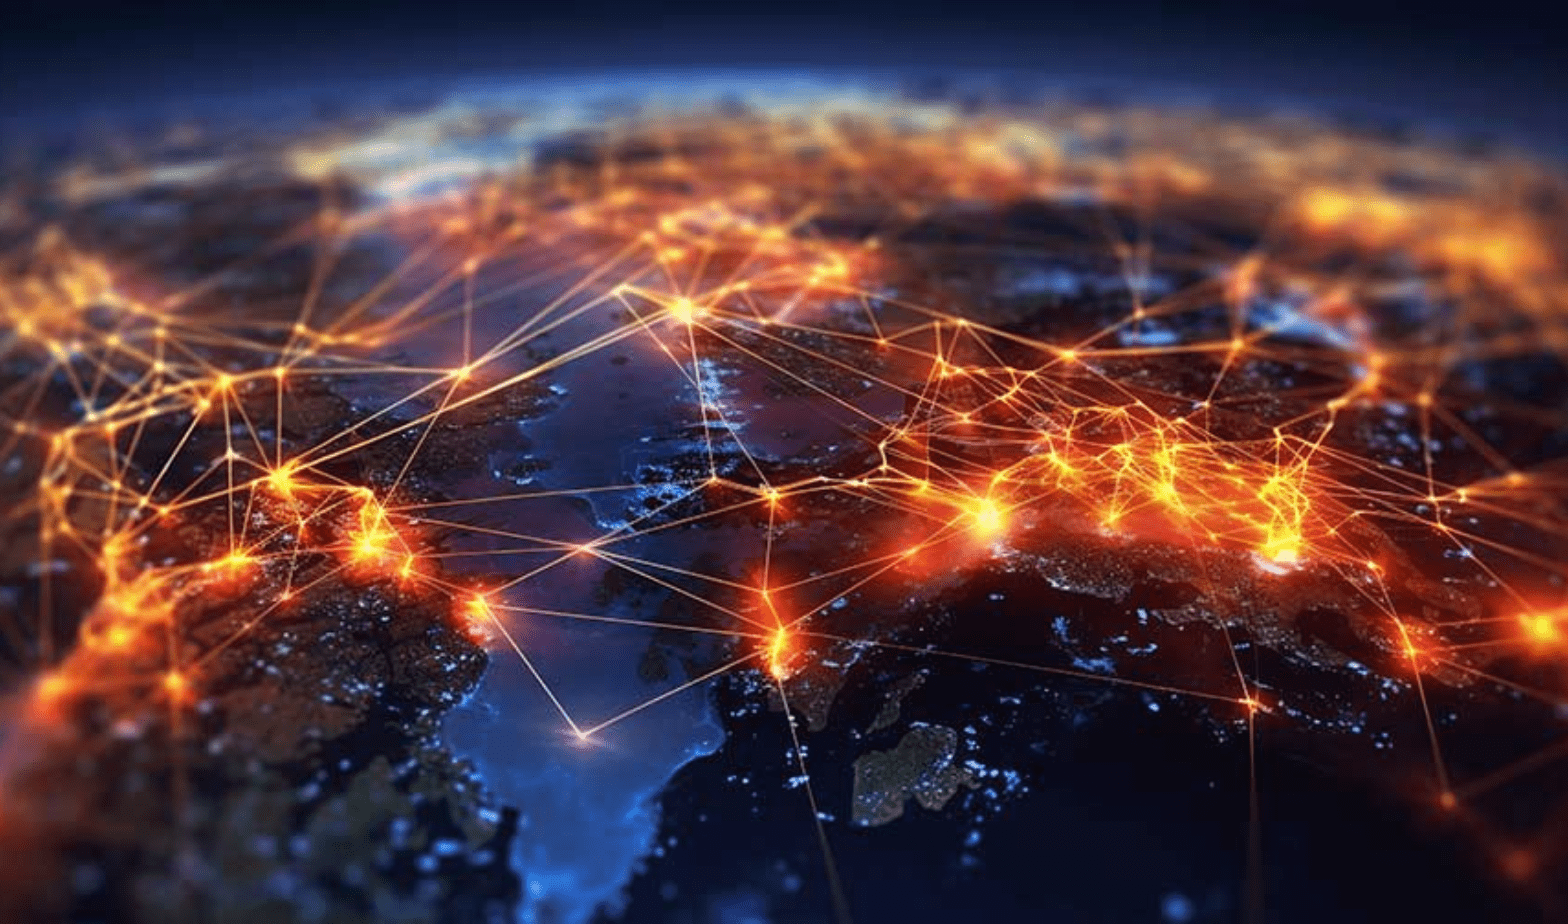 Trustack MSP Cyber Security, IT Services, IT Support. A digital representation of a world map viewed from space, with bright, glowing lines and nodes connecting various points, illustrating a global cybersecurity network. The map is dark with highlighted regions and illuminated pathways crisscrossing the continents, showcasing an evolving threat landscape.